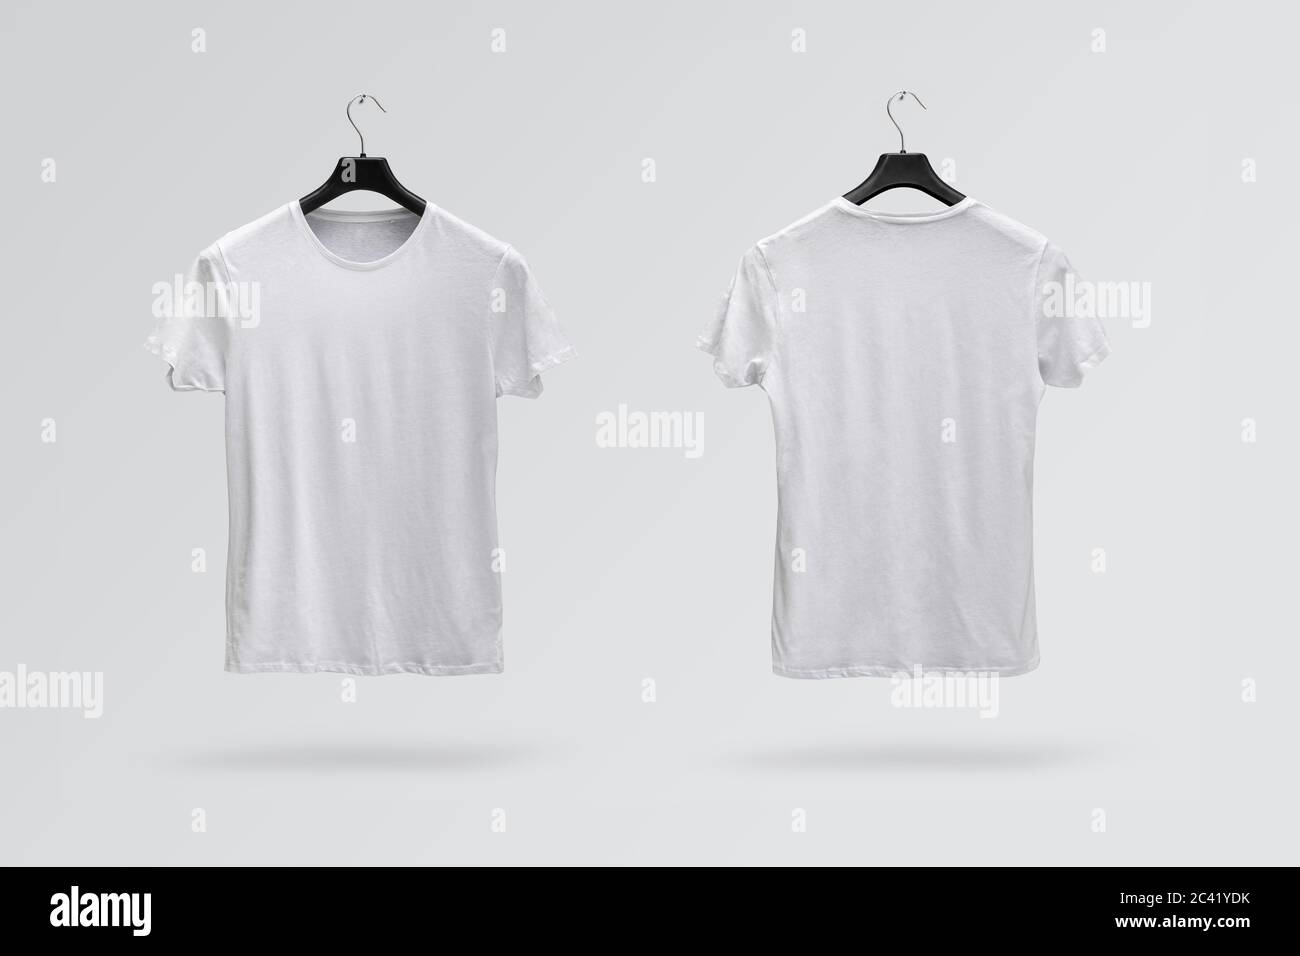 Black Tshirt Front And Back Isolated On White Background With